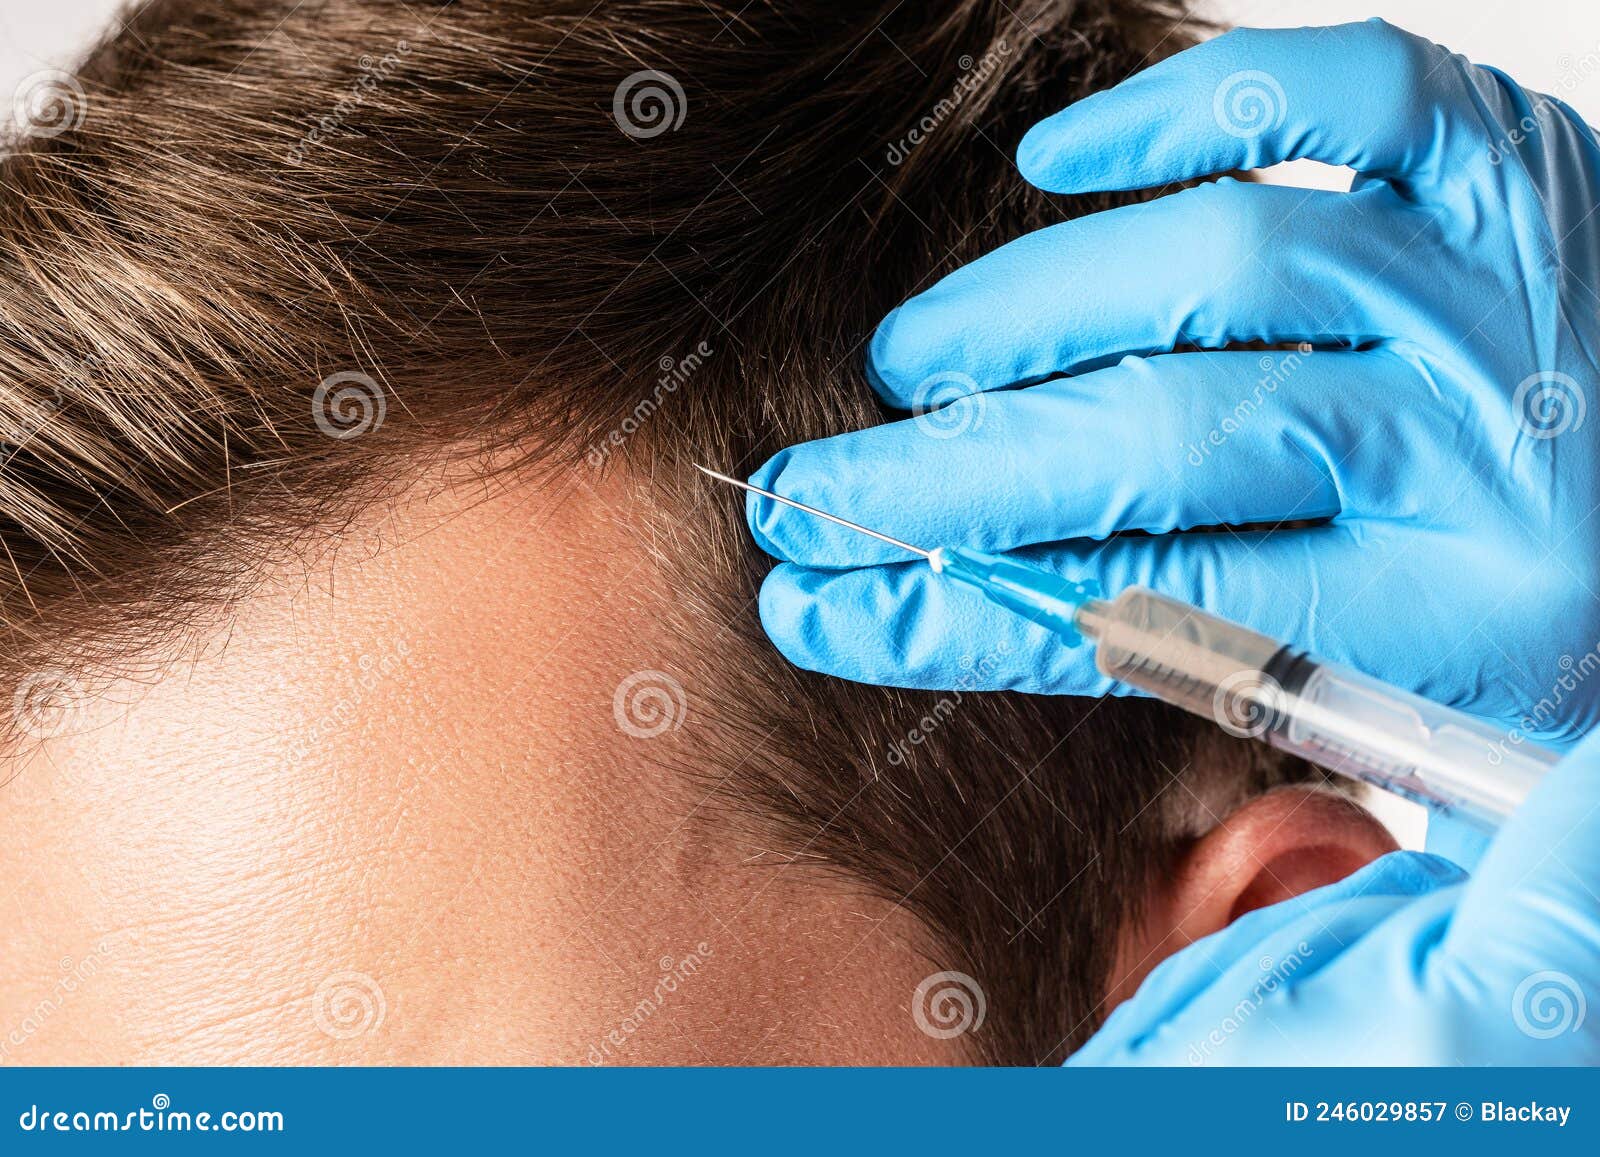 man receiving scalp injection for hair grow